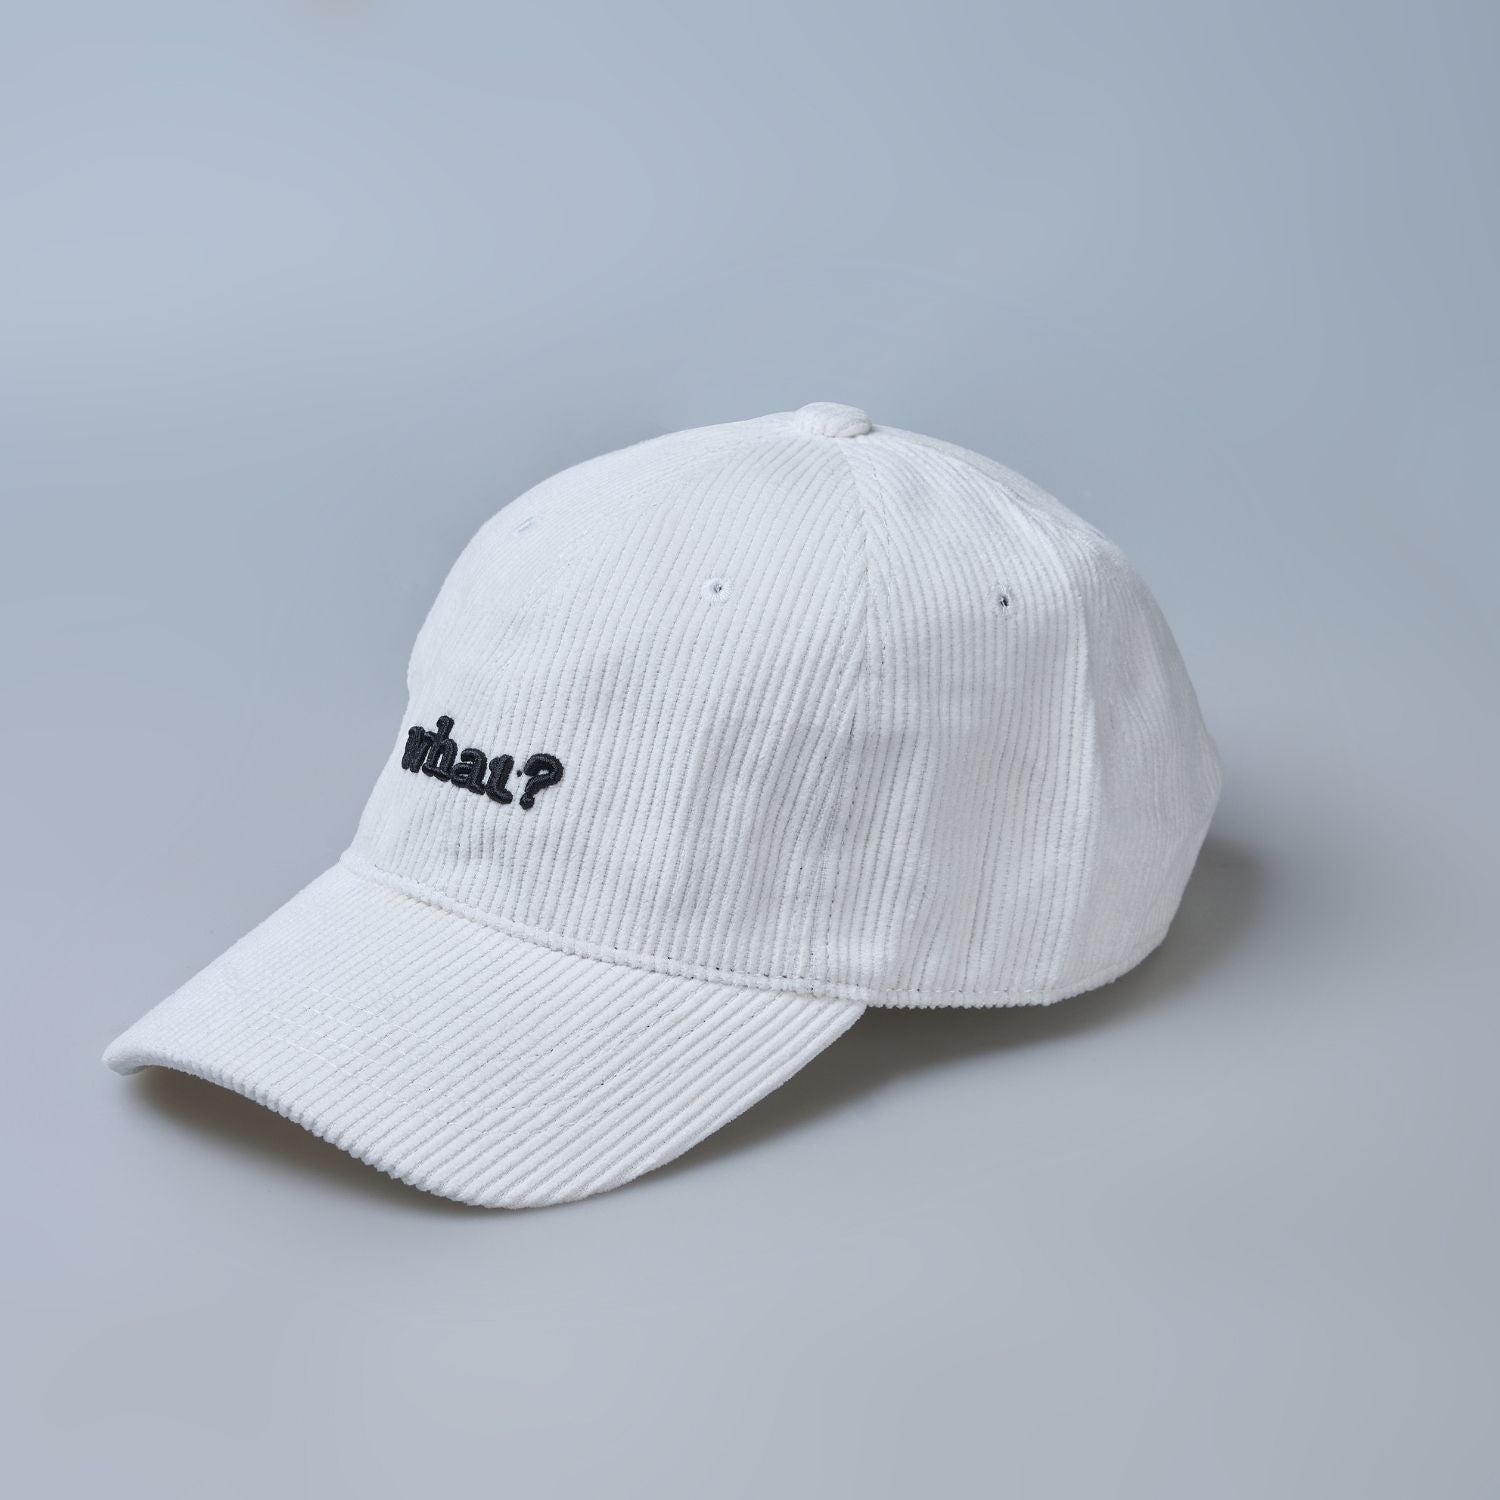 White colored cap for men with 'what' text written on it, design details..